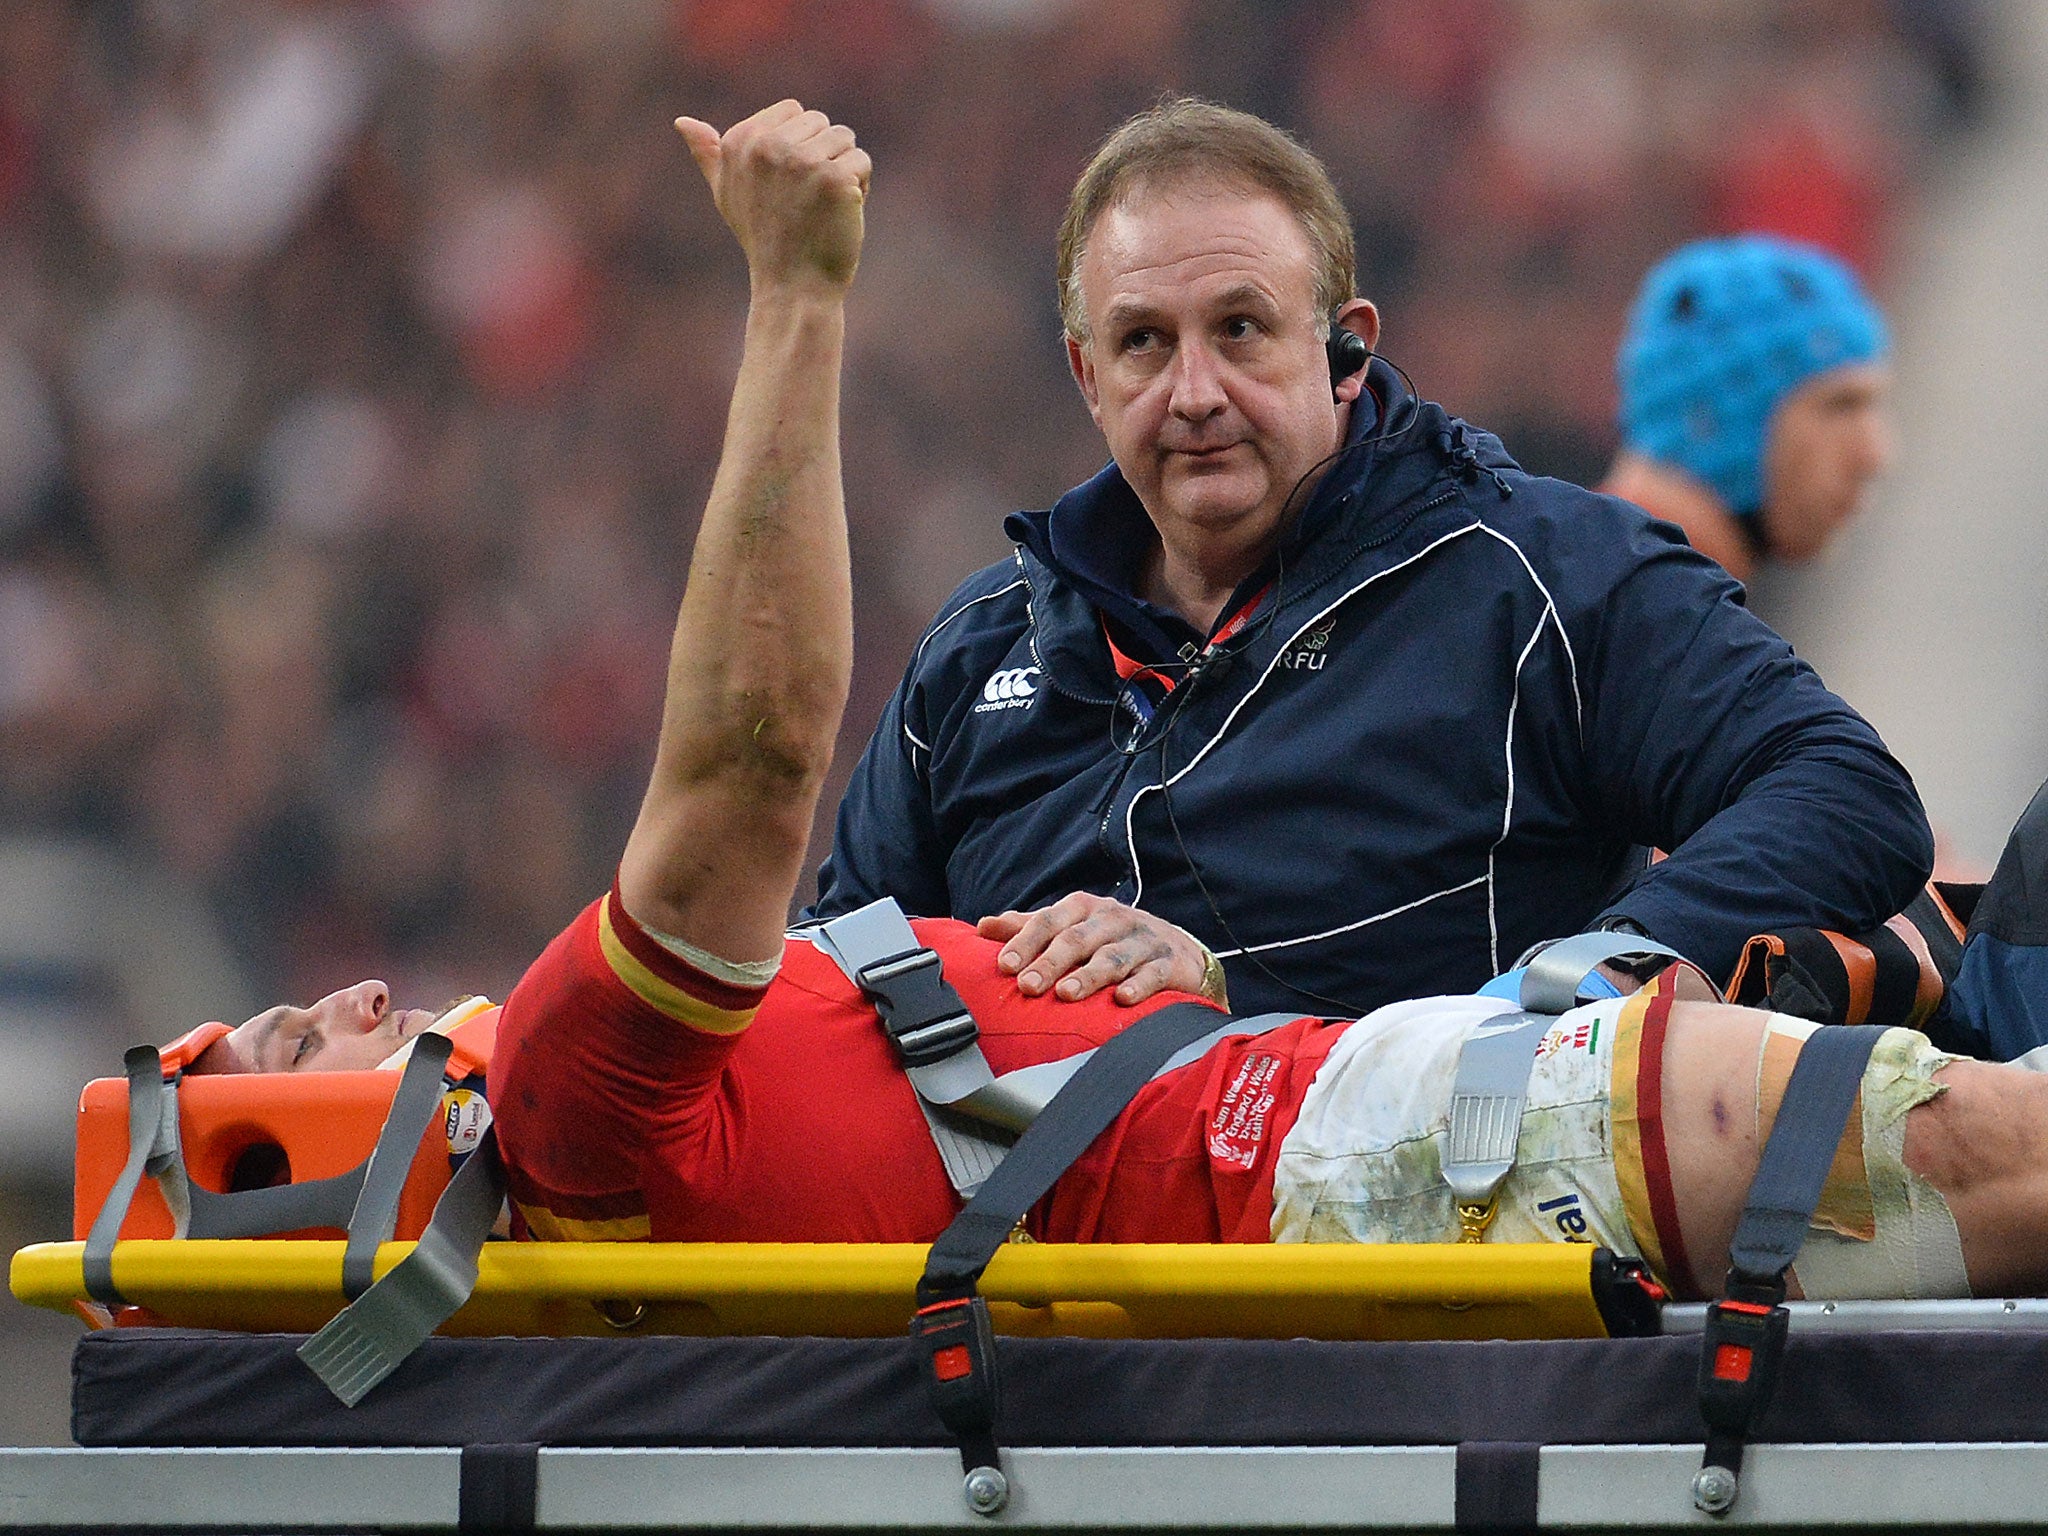 Sam Warburton has considered stepping down as Wales captain for a number of years as injuries take their toll